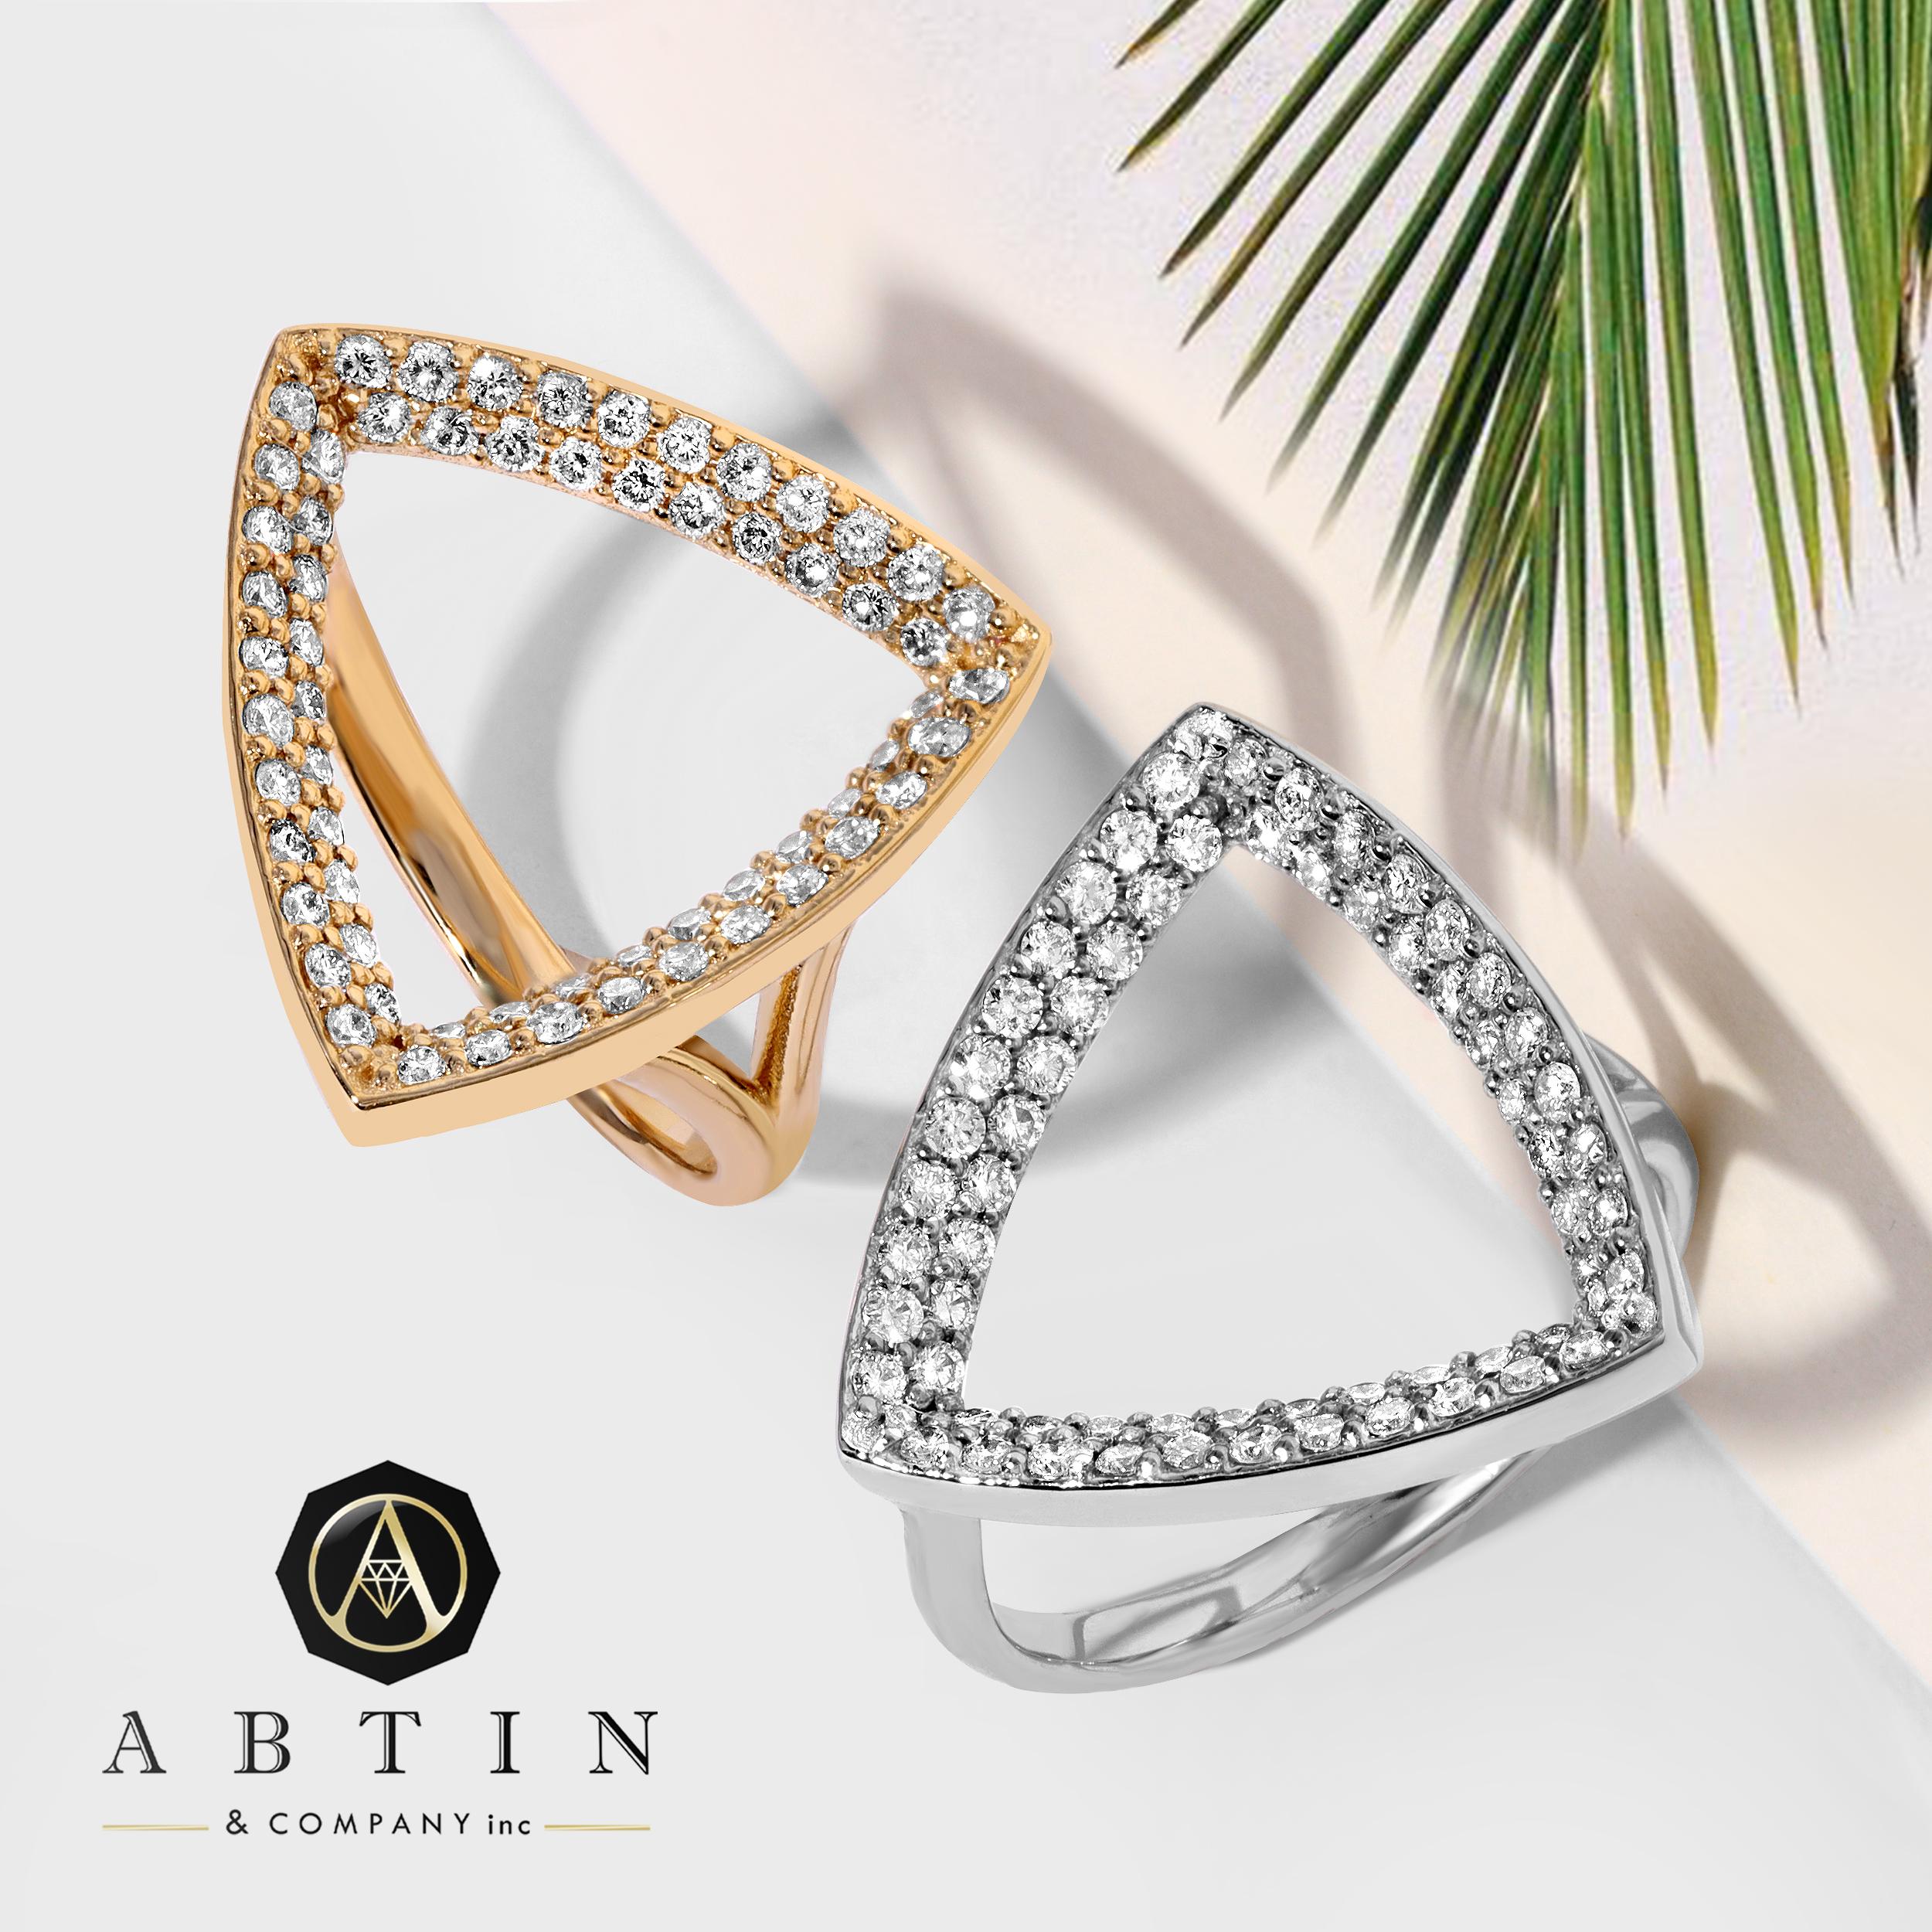 This exquisite geometric diamond ring, crafted in 14K gold, showcases brilliant round diamonds totaling 0.60 ct, adding a touch of elegance to any ensemble.
Gold Weight: 4.50 gr.
Diamond Weight: 0.60 ct
Available in any finger size.
Available in